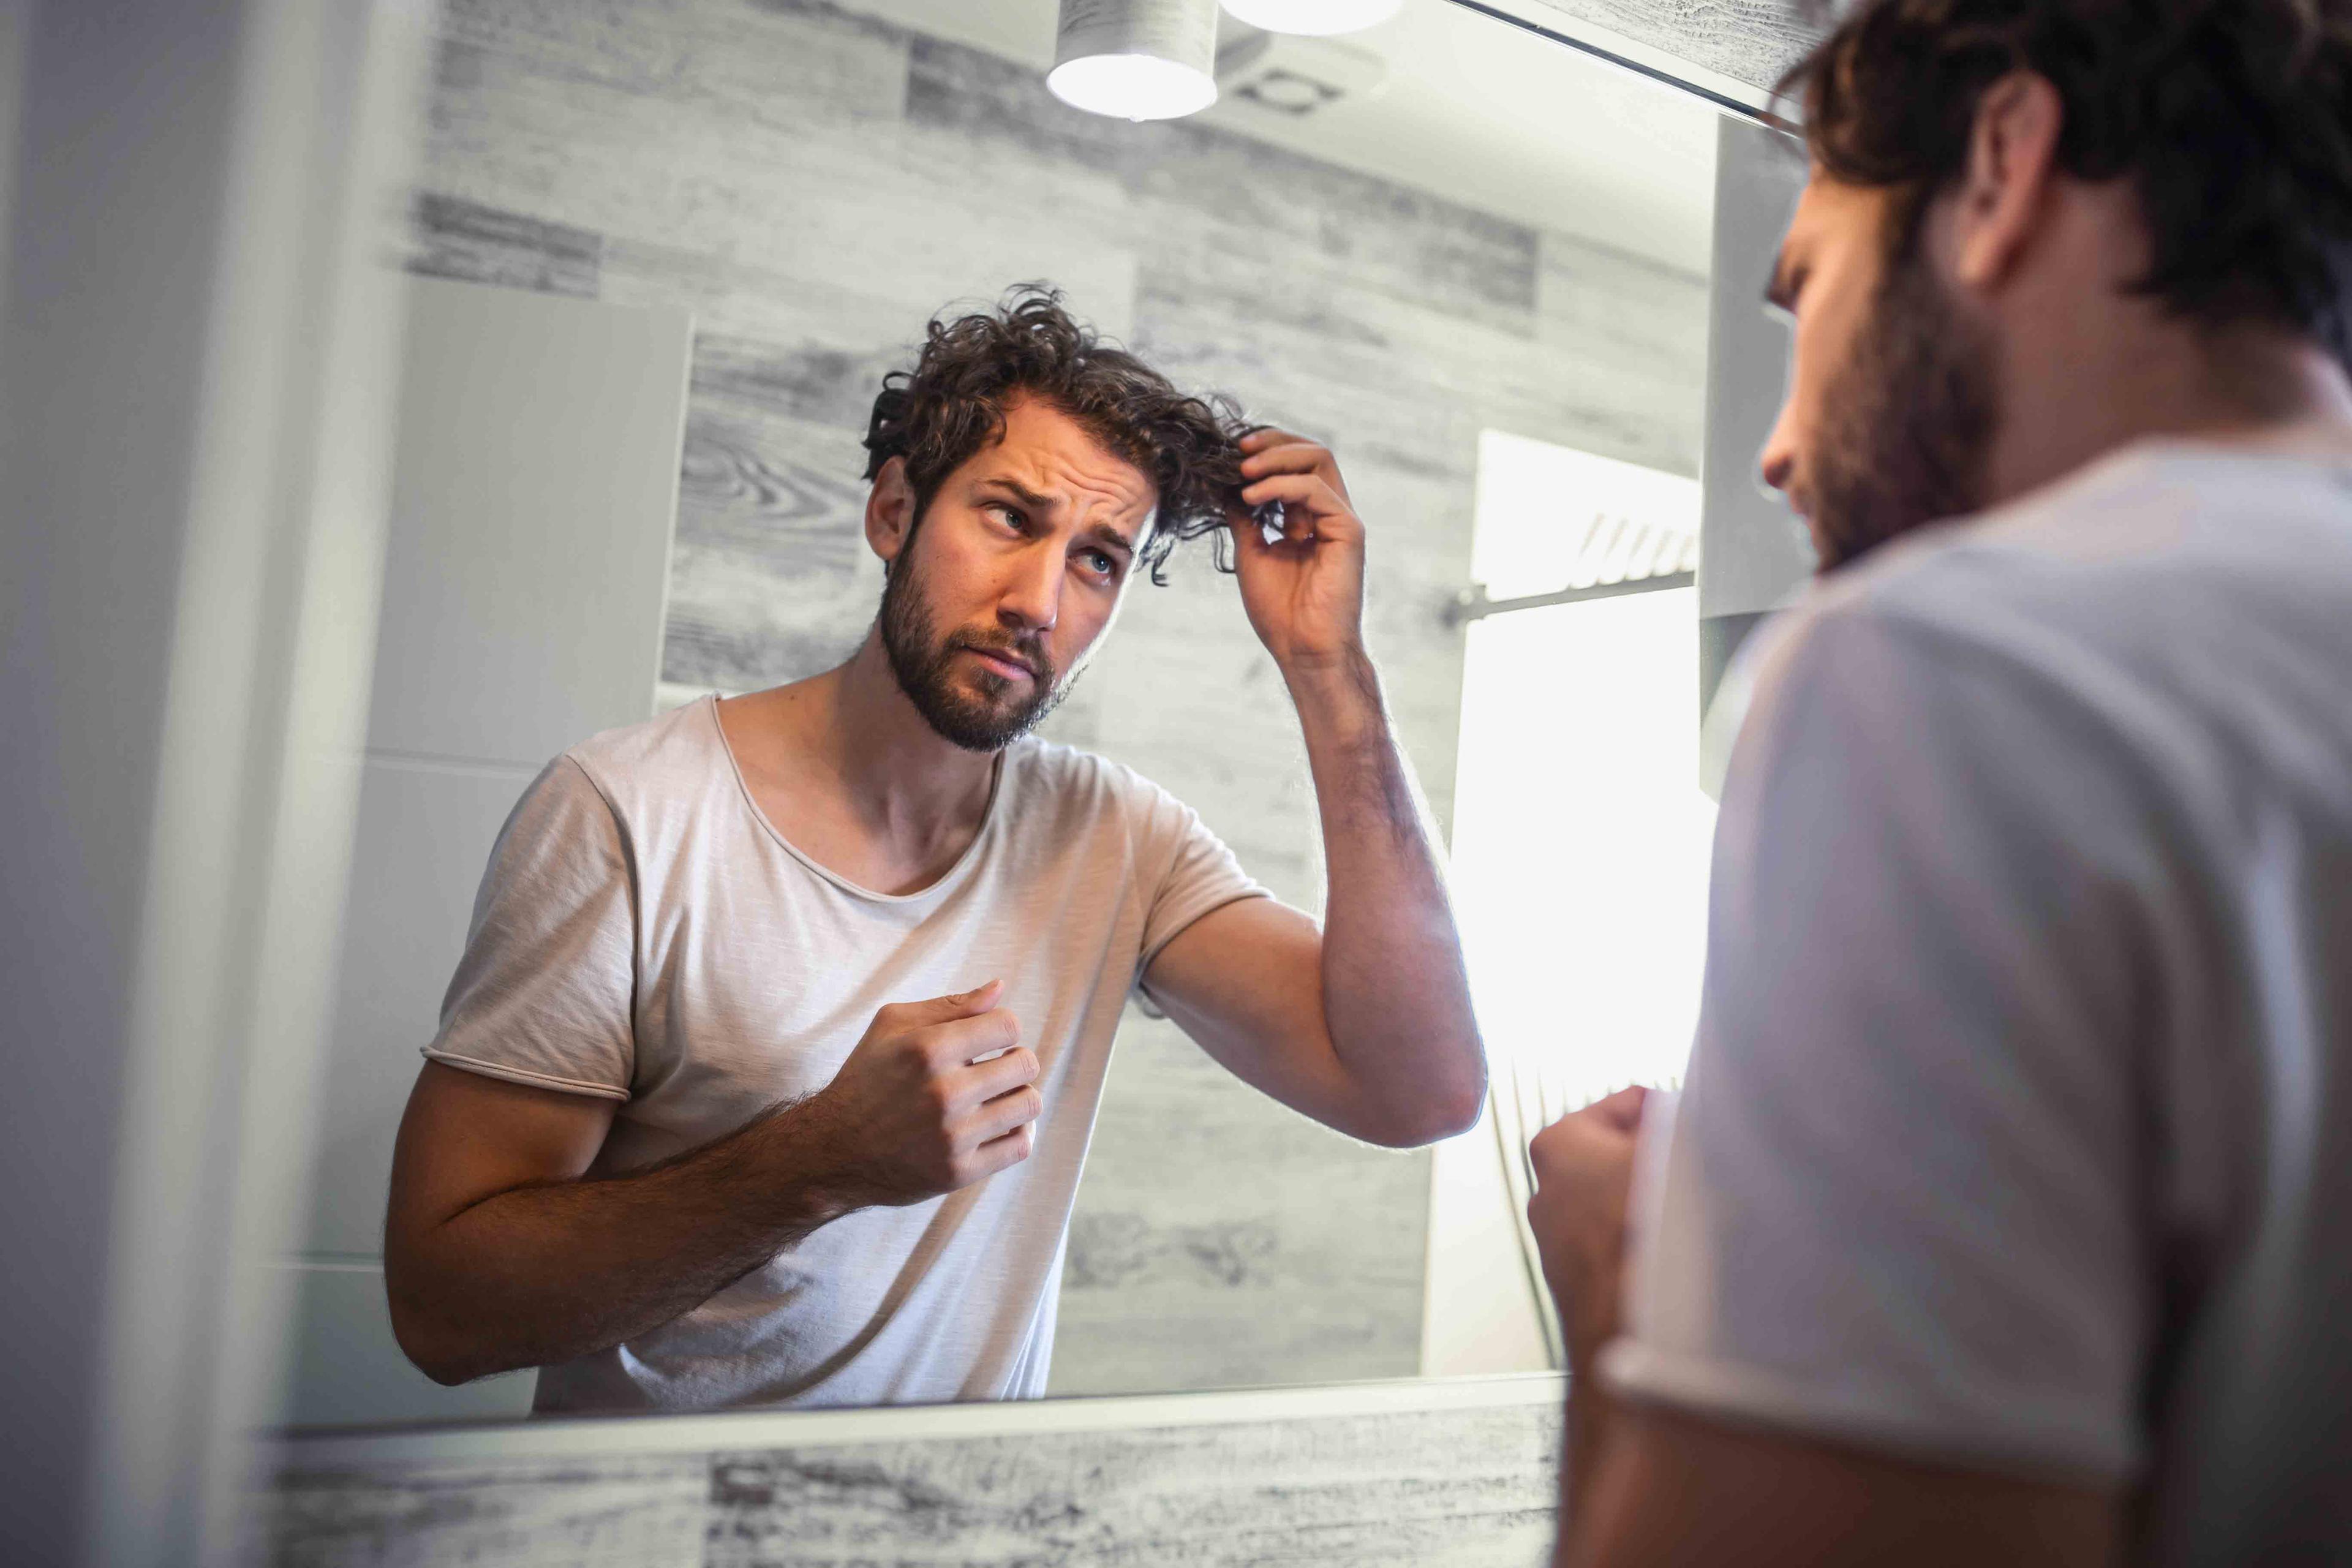 Young brunette man with beard touching hair while looking in bathroom mirror with concerned expression on his face.